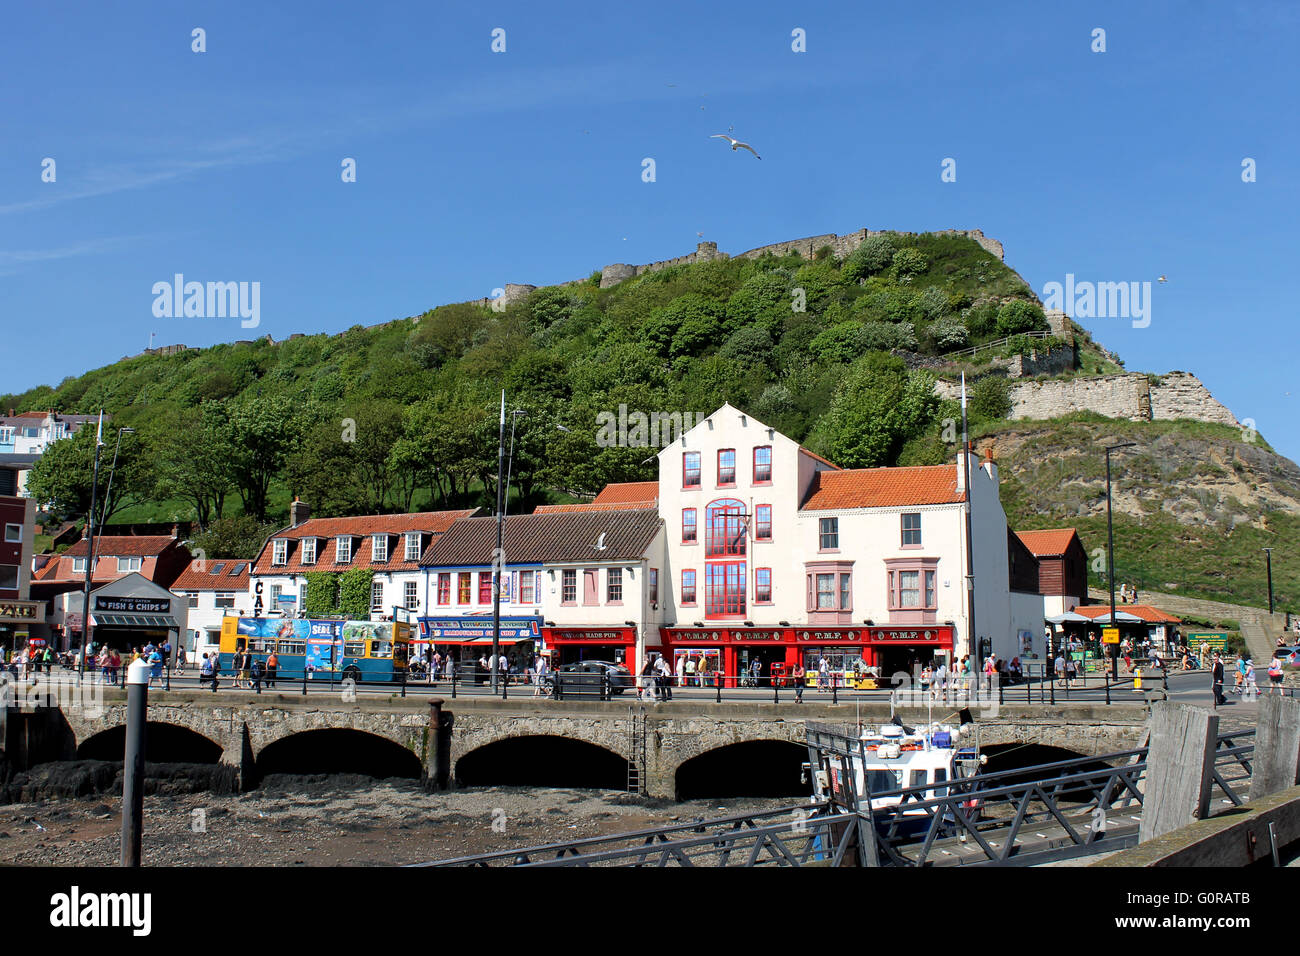 SOUTH BAY HARBOR, SCARBOROUGH, NORTH YORKSHIRE, ENGLAND - 19th May 2014: Scarborough beach resort harbor on the 19th of May 2014 Stock Photo